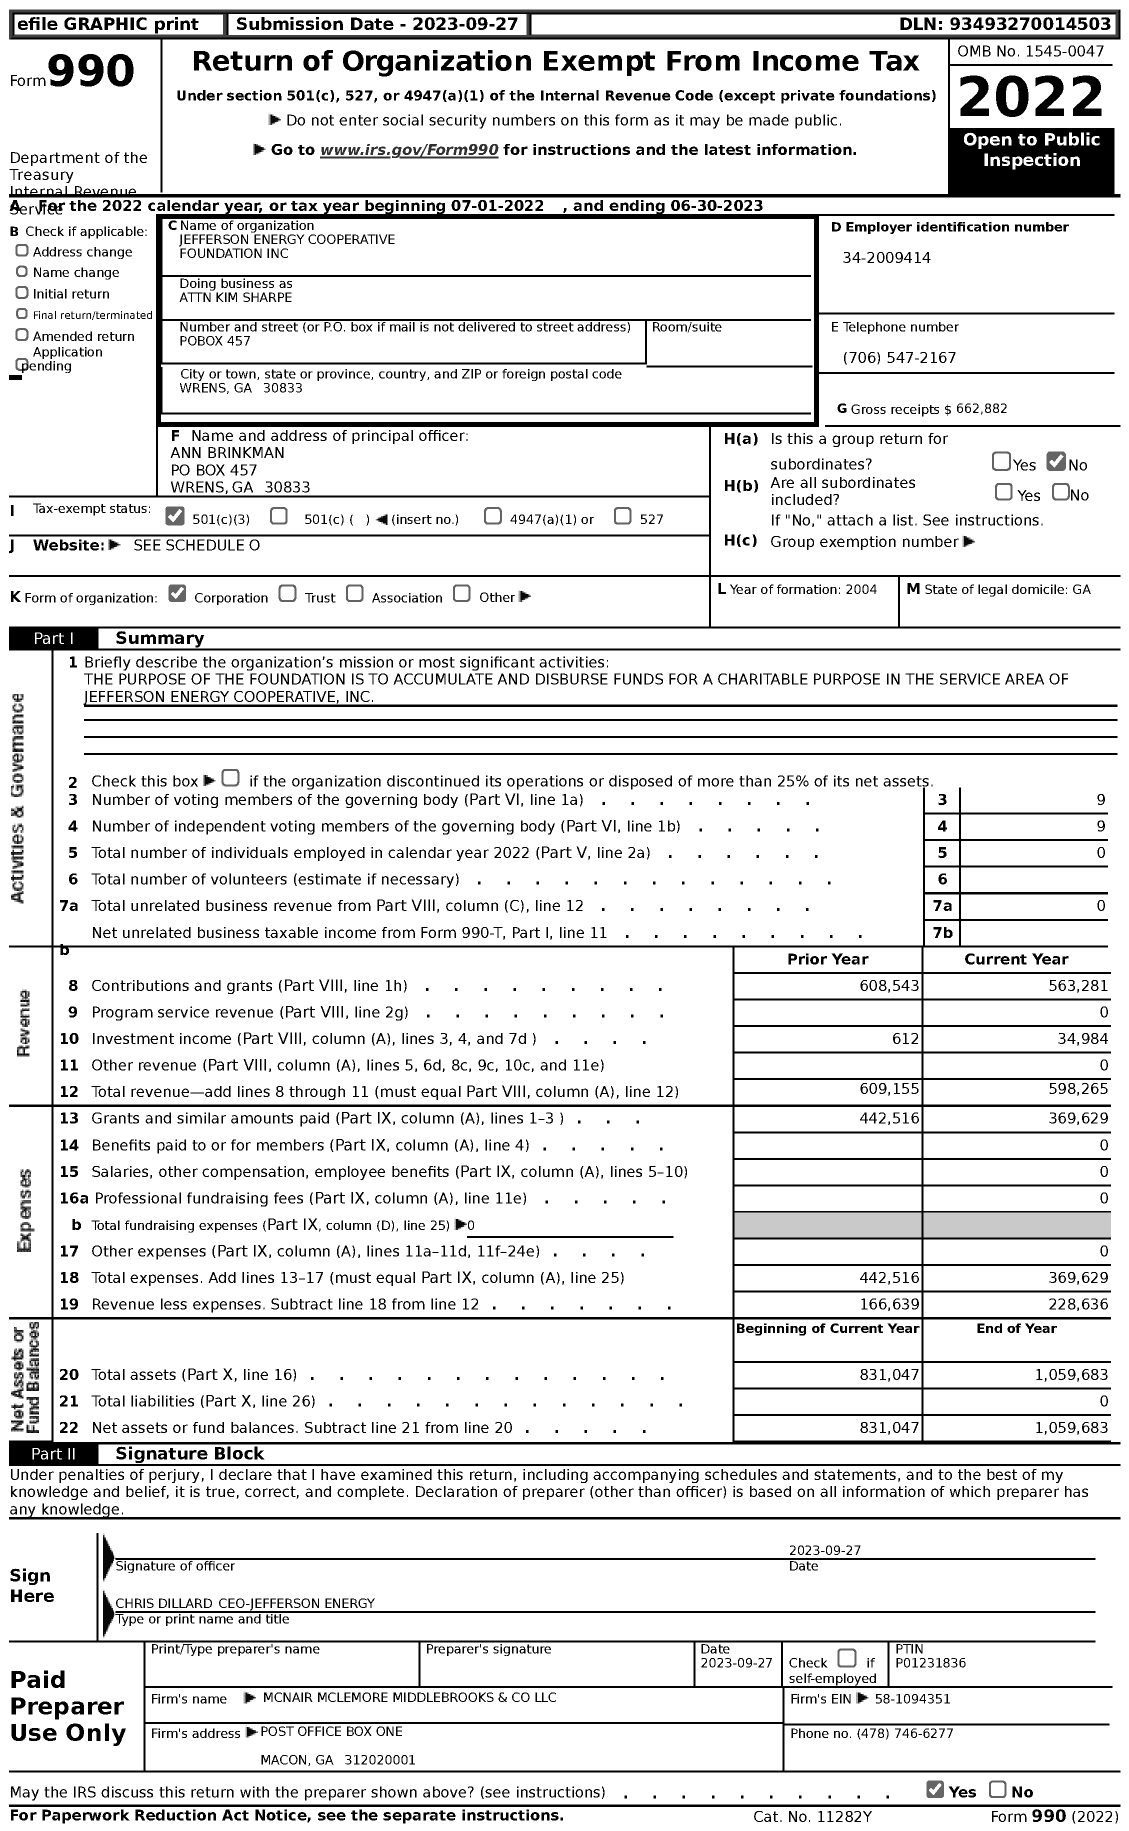 Image of first page of 2022 Form 990 for Attn Kim Sharpe